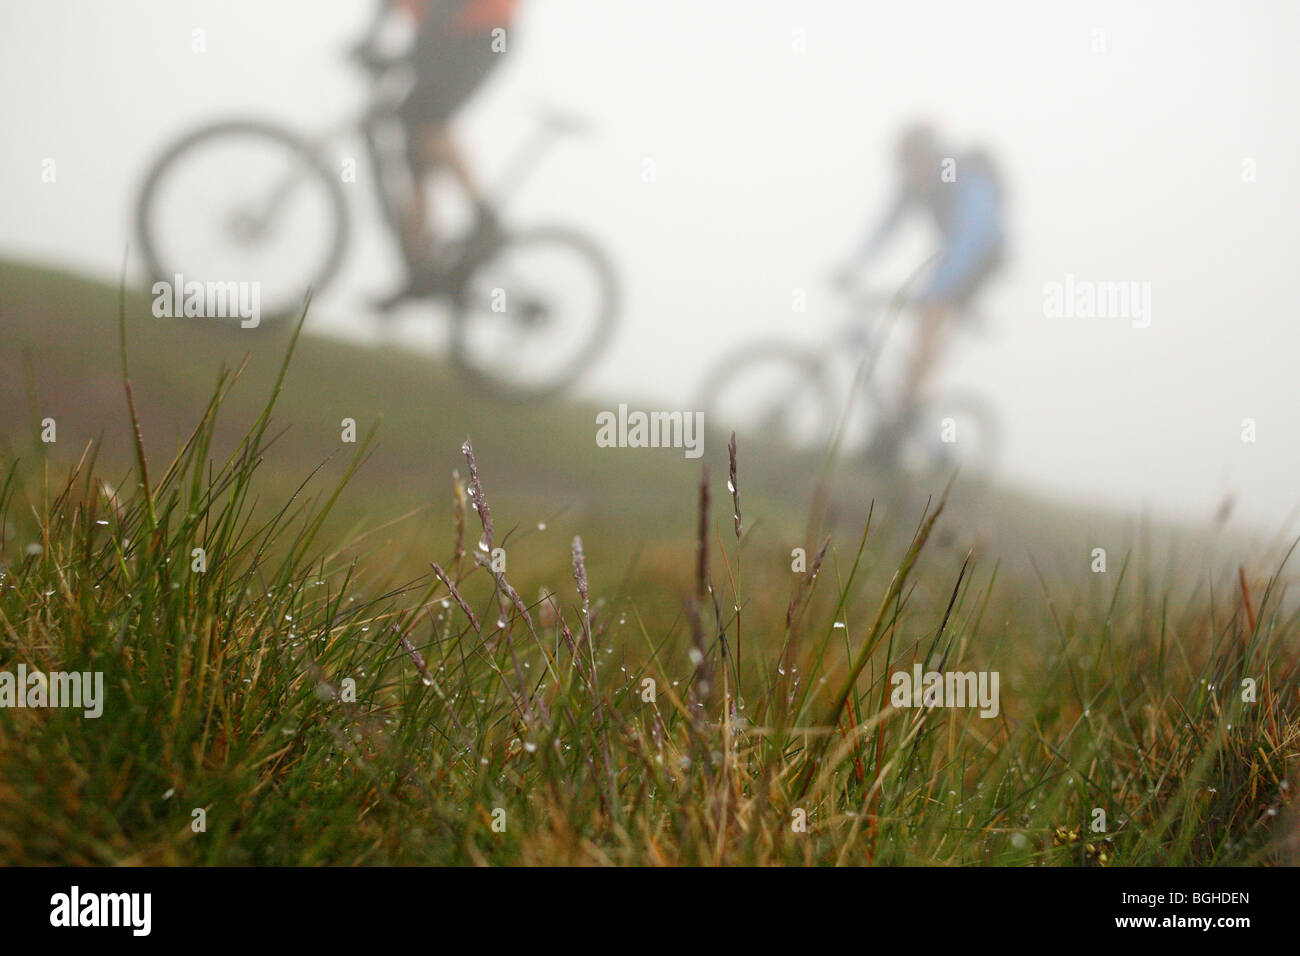 Two mountain bikers ride a misty trail at Howgill Fells, United Kingdom Stock Photo